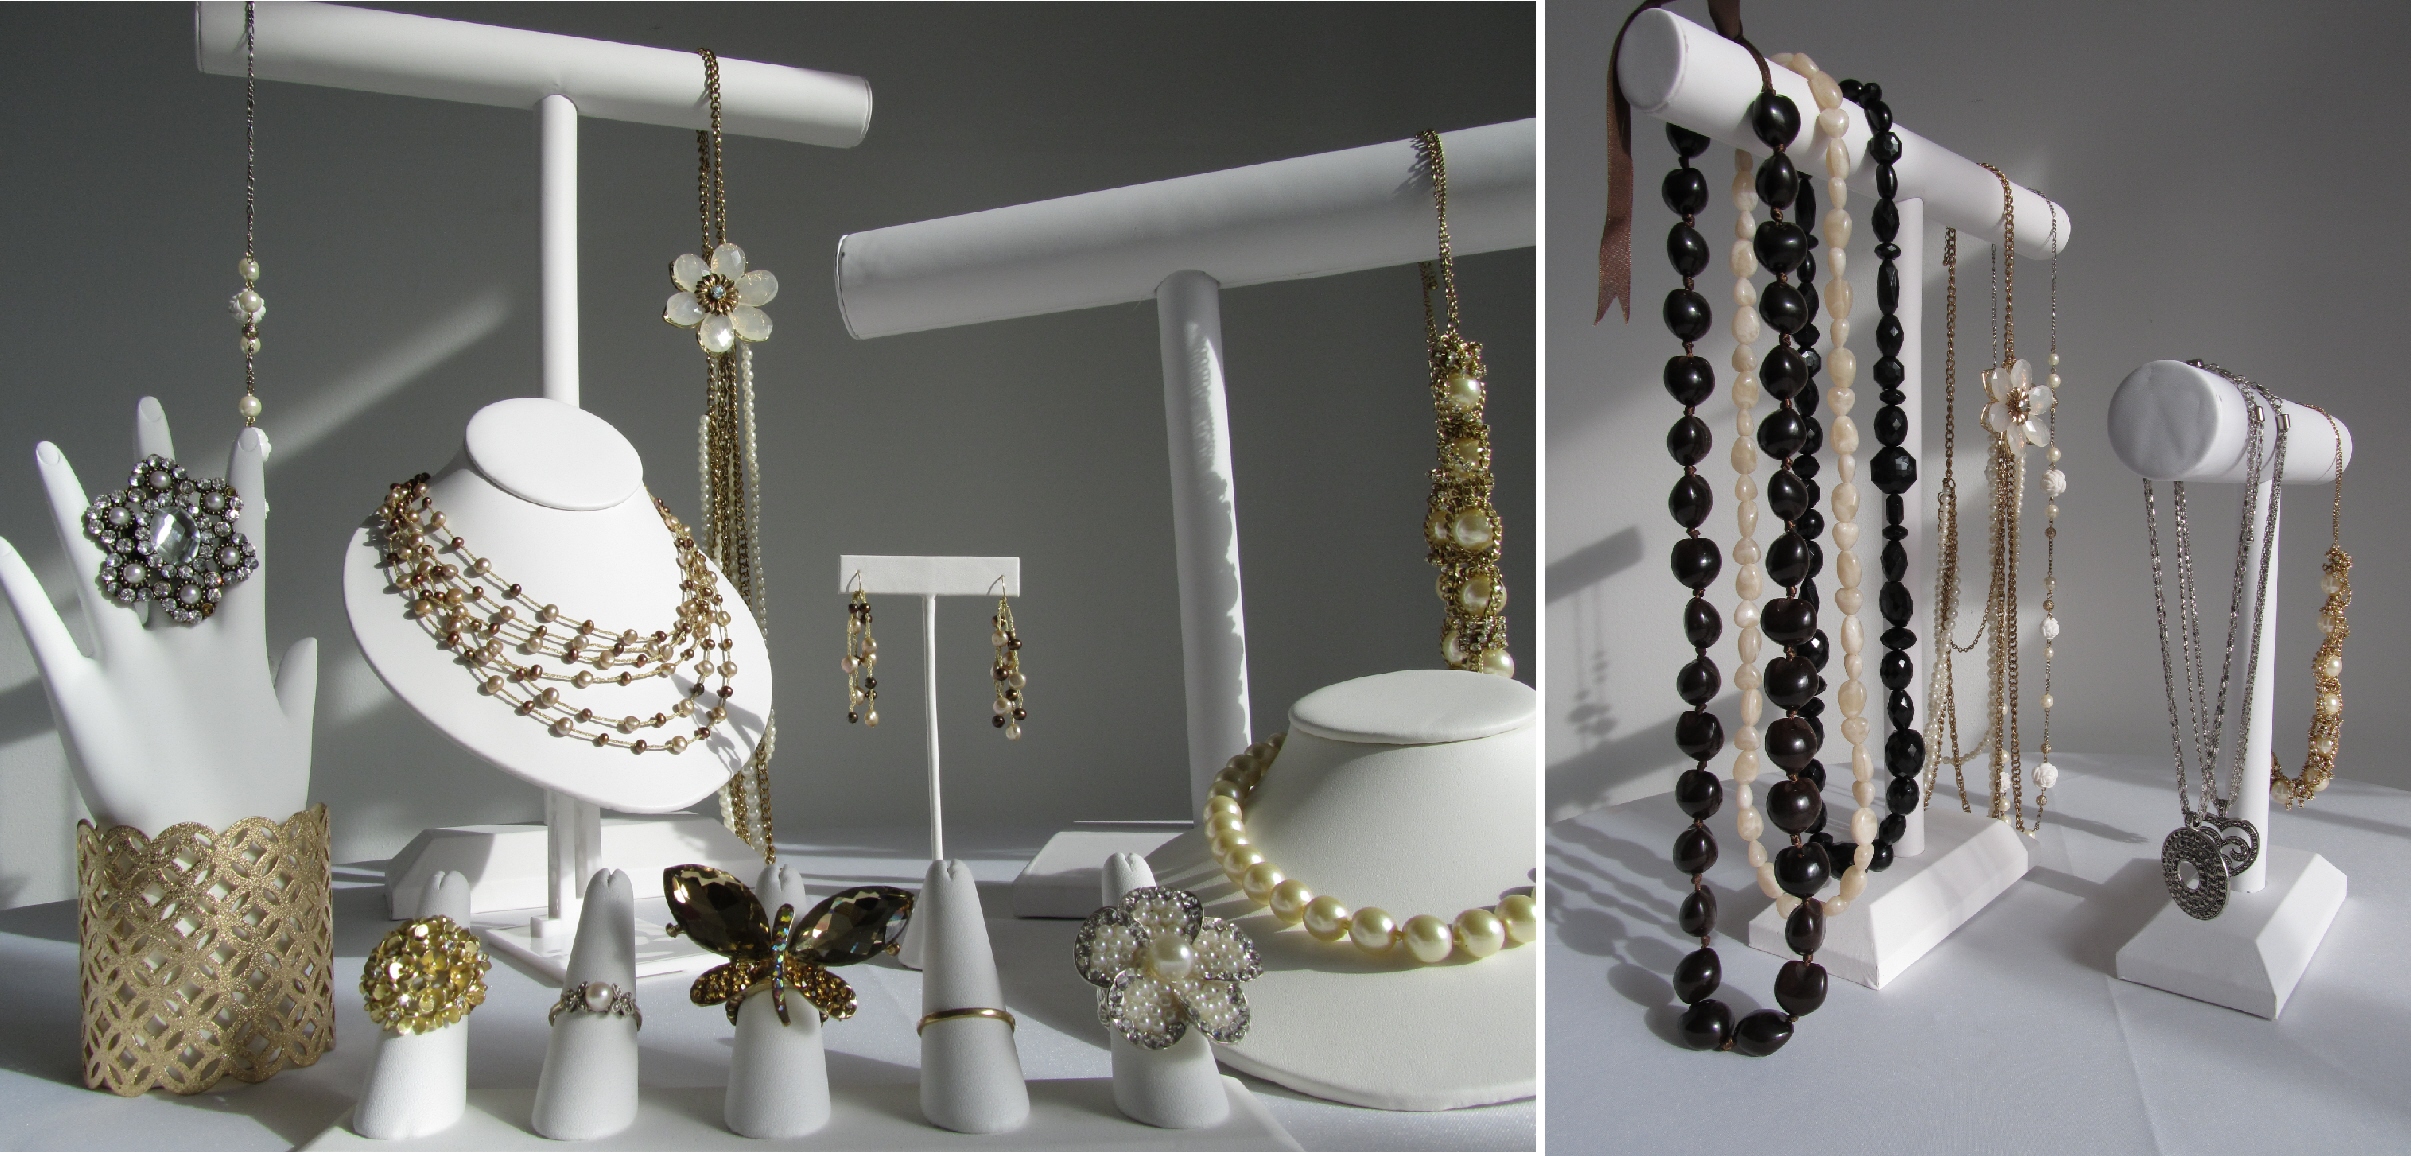 Jewelry Display Ideas for Retail | How to Display Jewelry for Sale